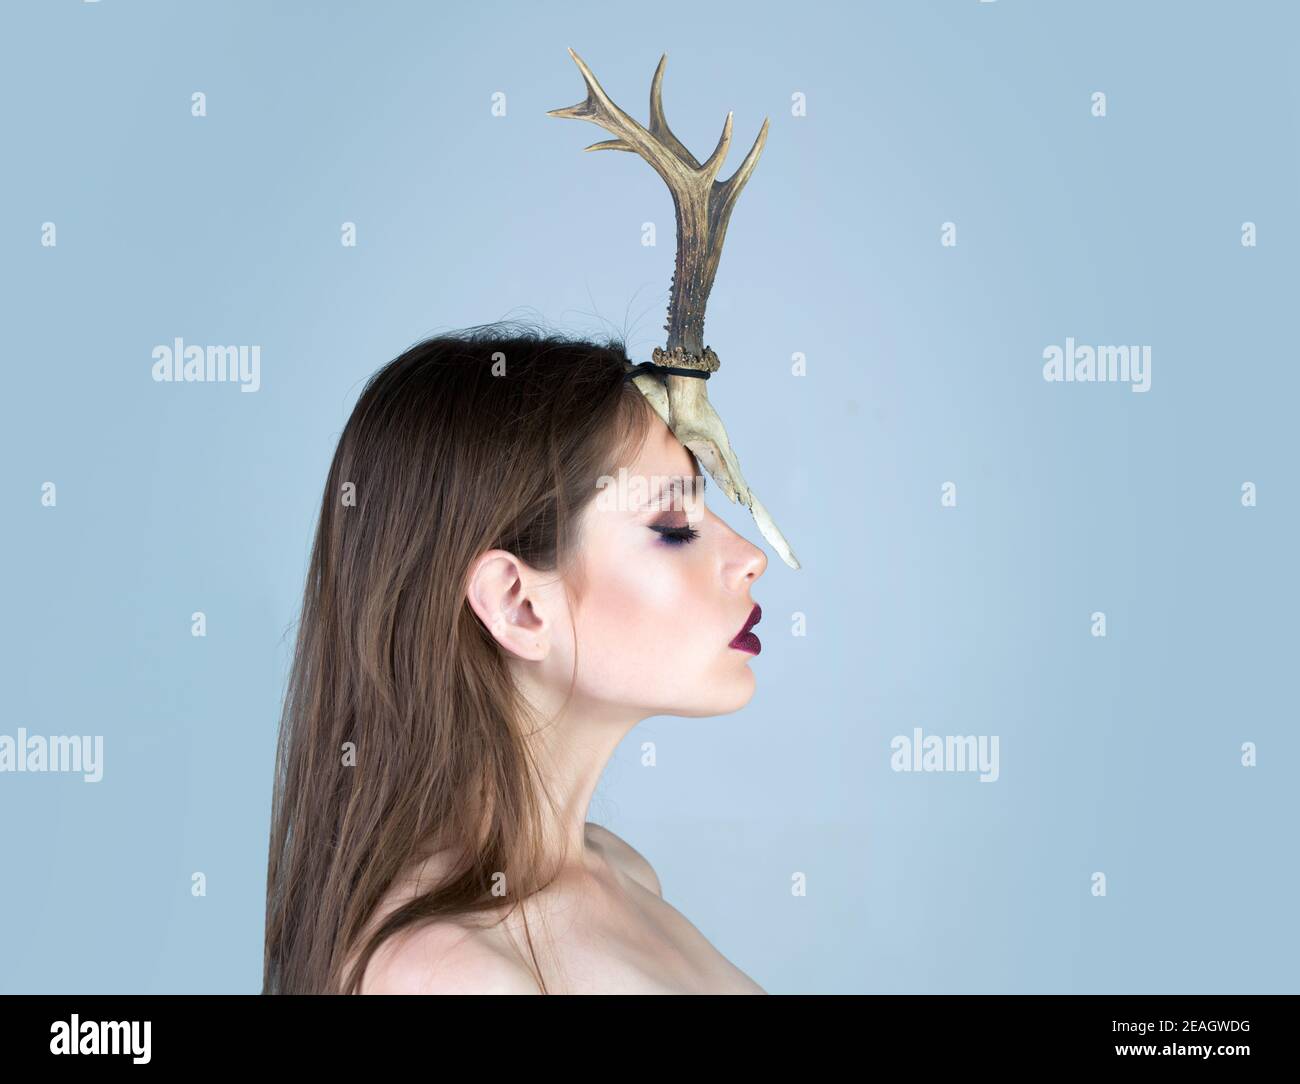 Young woman shaman conjures, she has a horn of an animal on her head. Profile face. Stock Photo